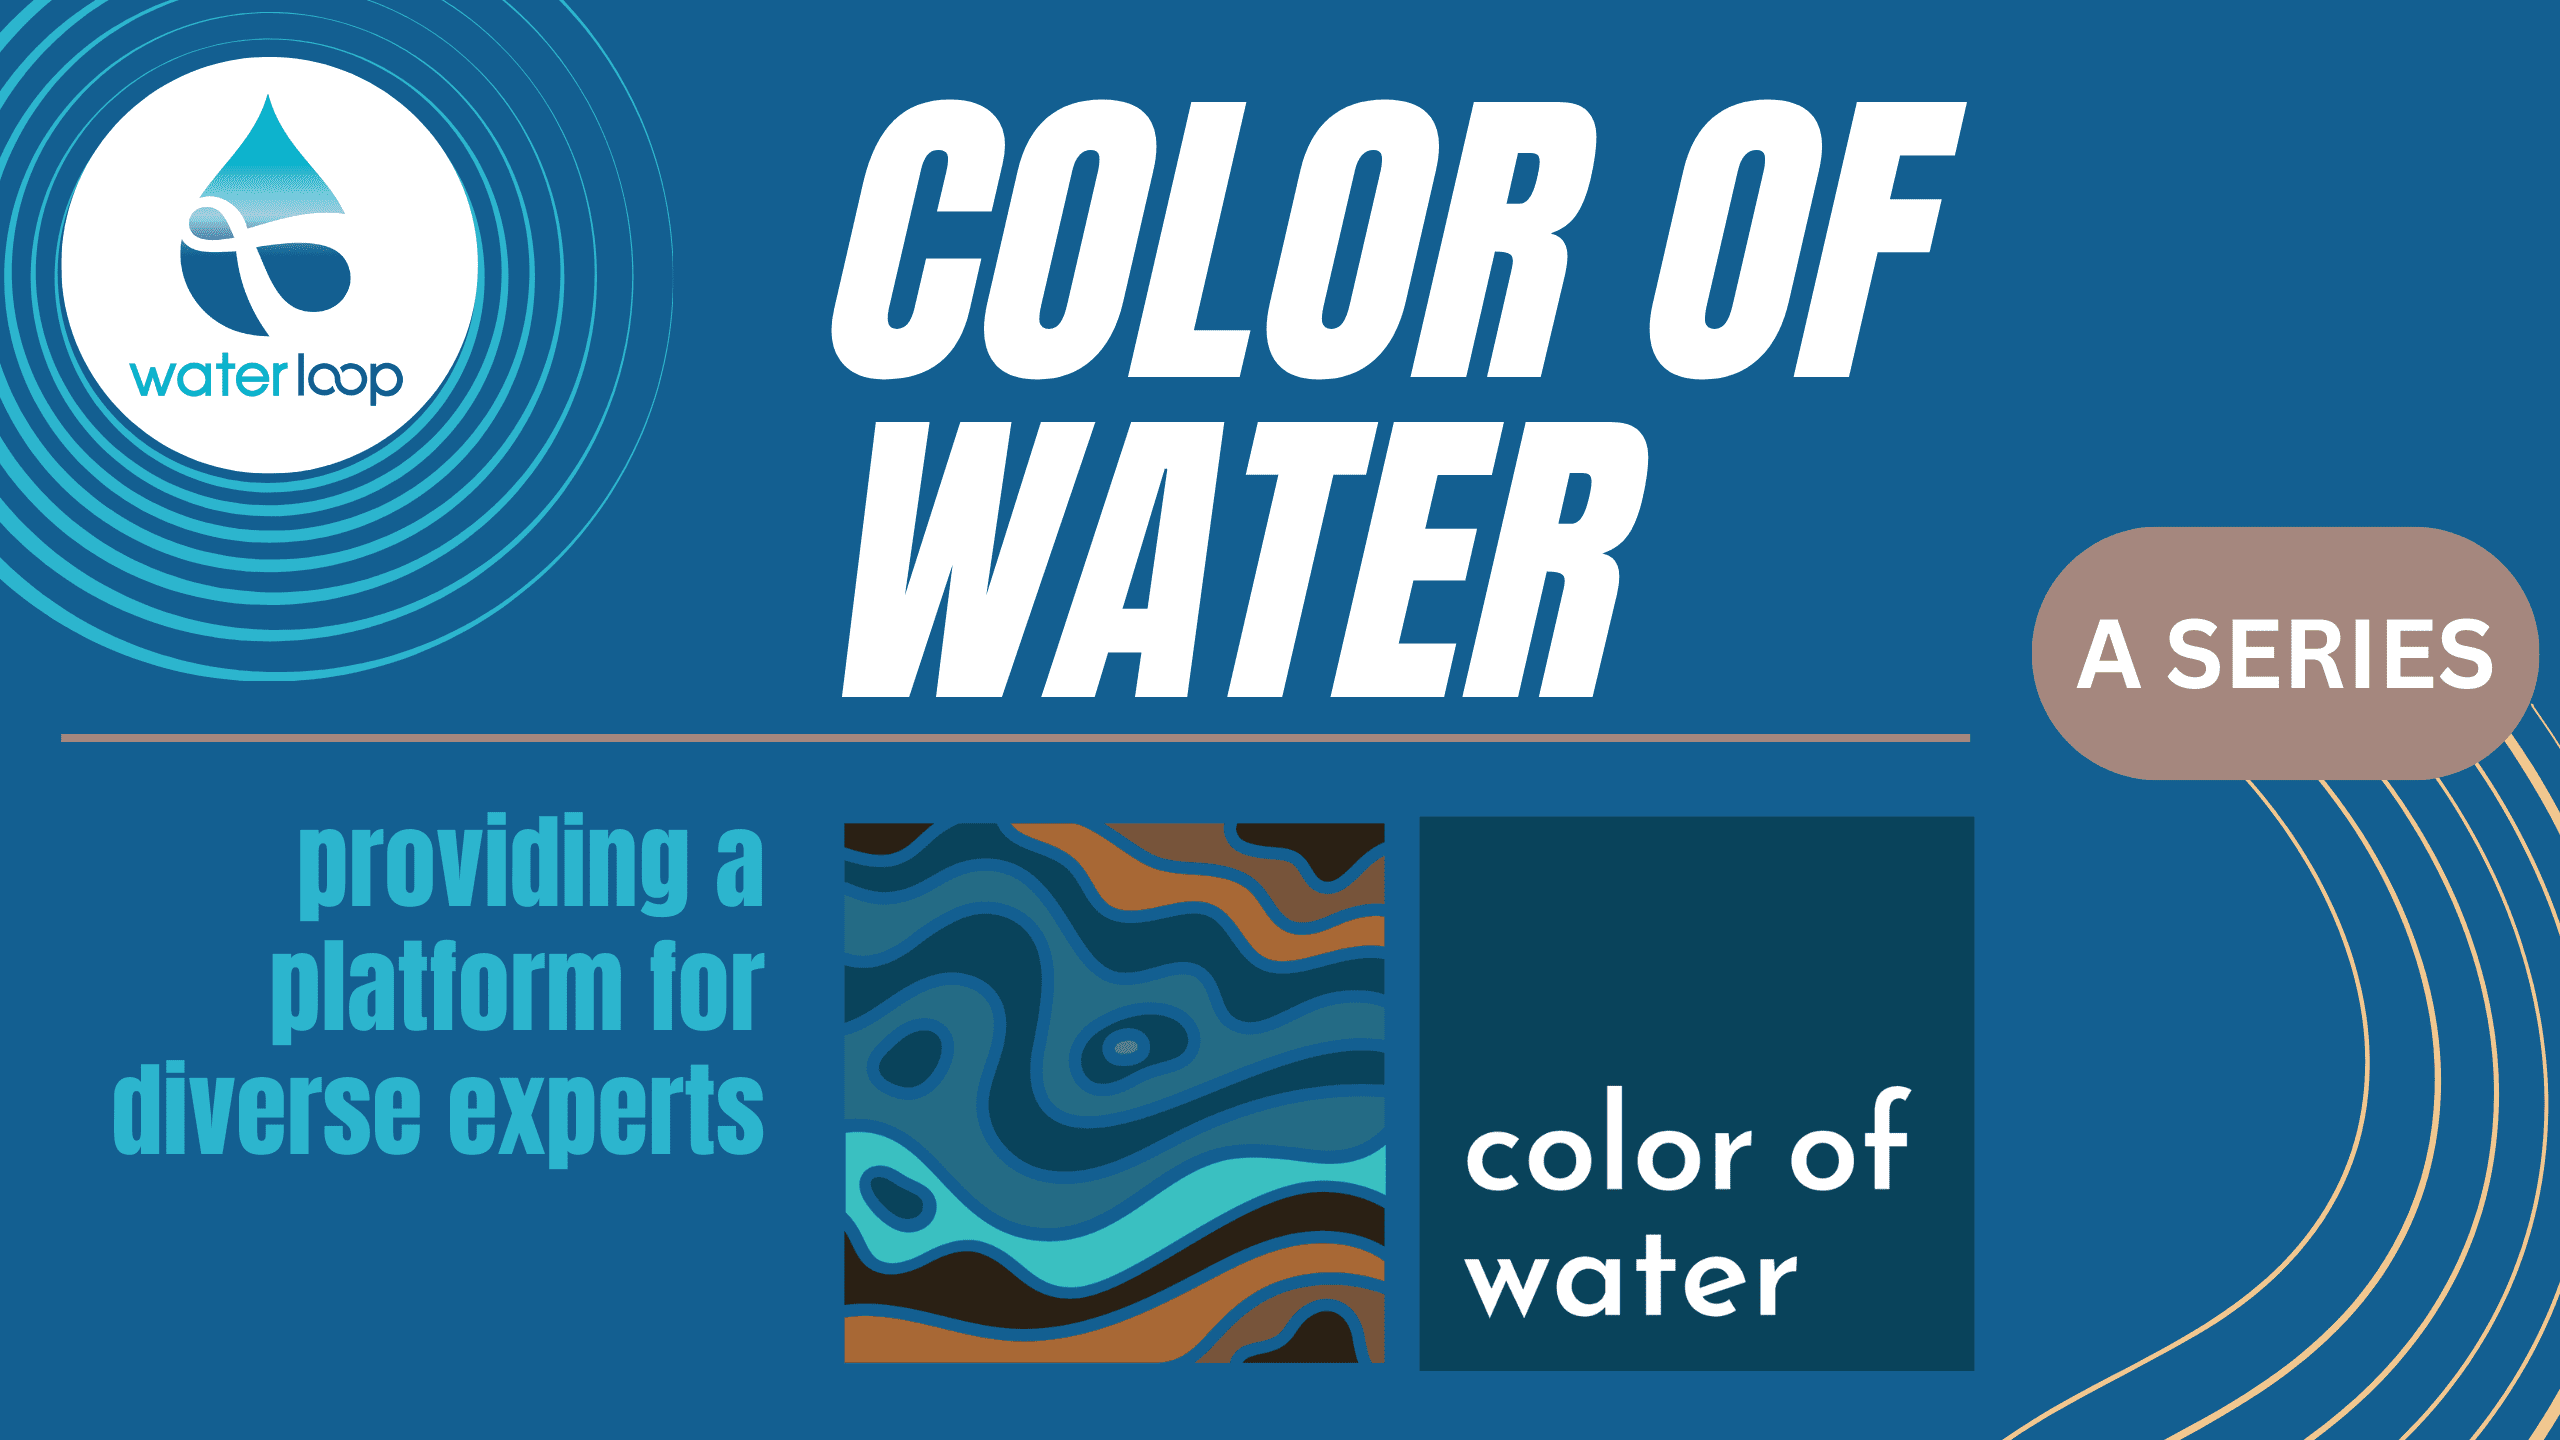 co-branded graphic image between waterloop and Color of Water promoting new podcast series